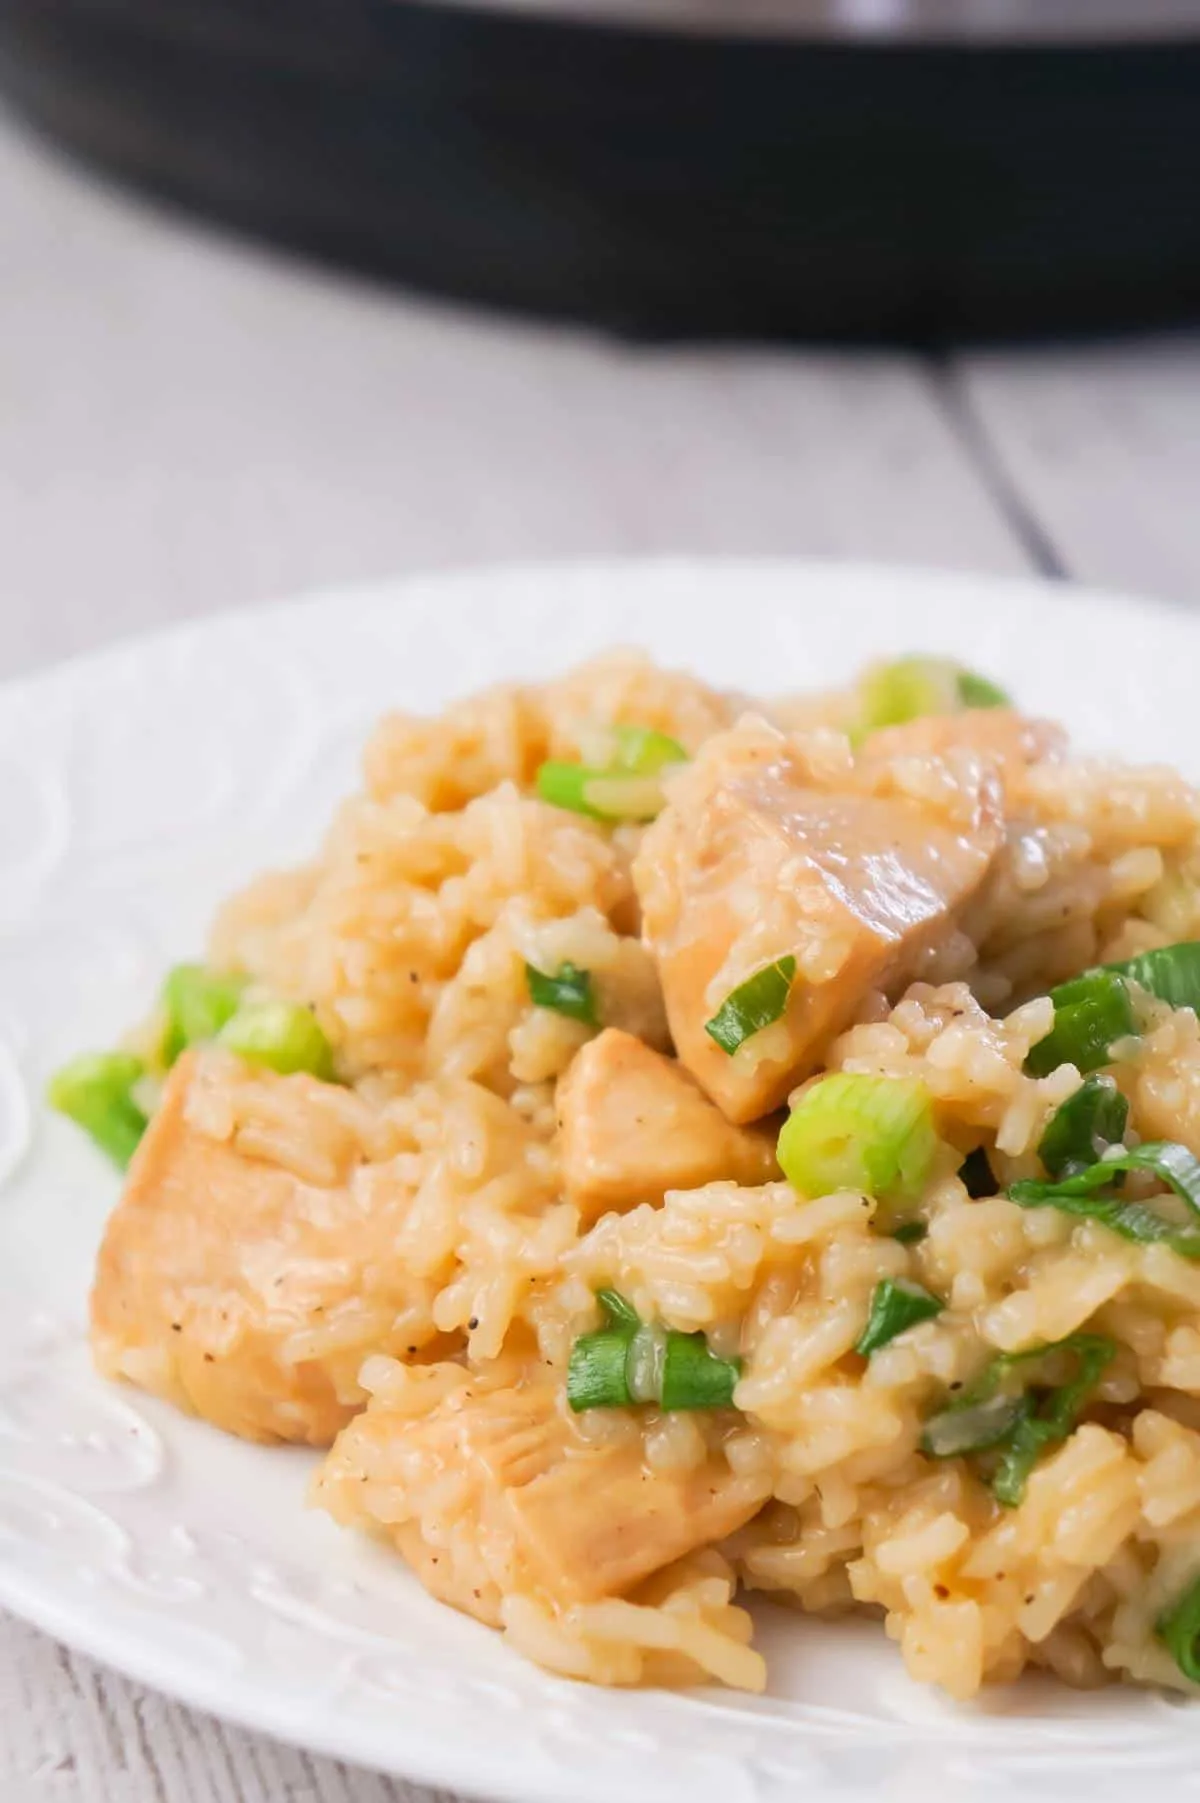 Instant Pot Honey Garlic Chicken and Rice is an easy pressure cooker rice dish loaded with chunks of chicken breast and a delicious sweet and savoury honey garlic sauce.